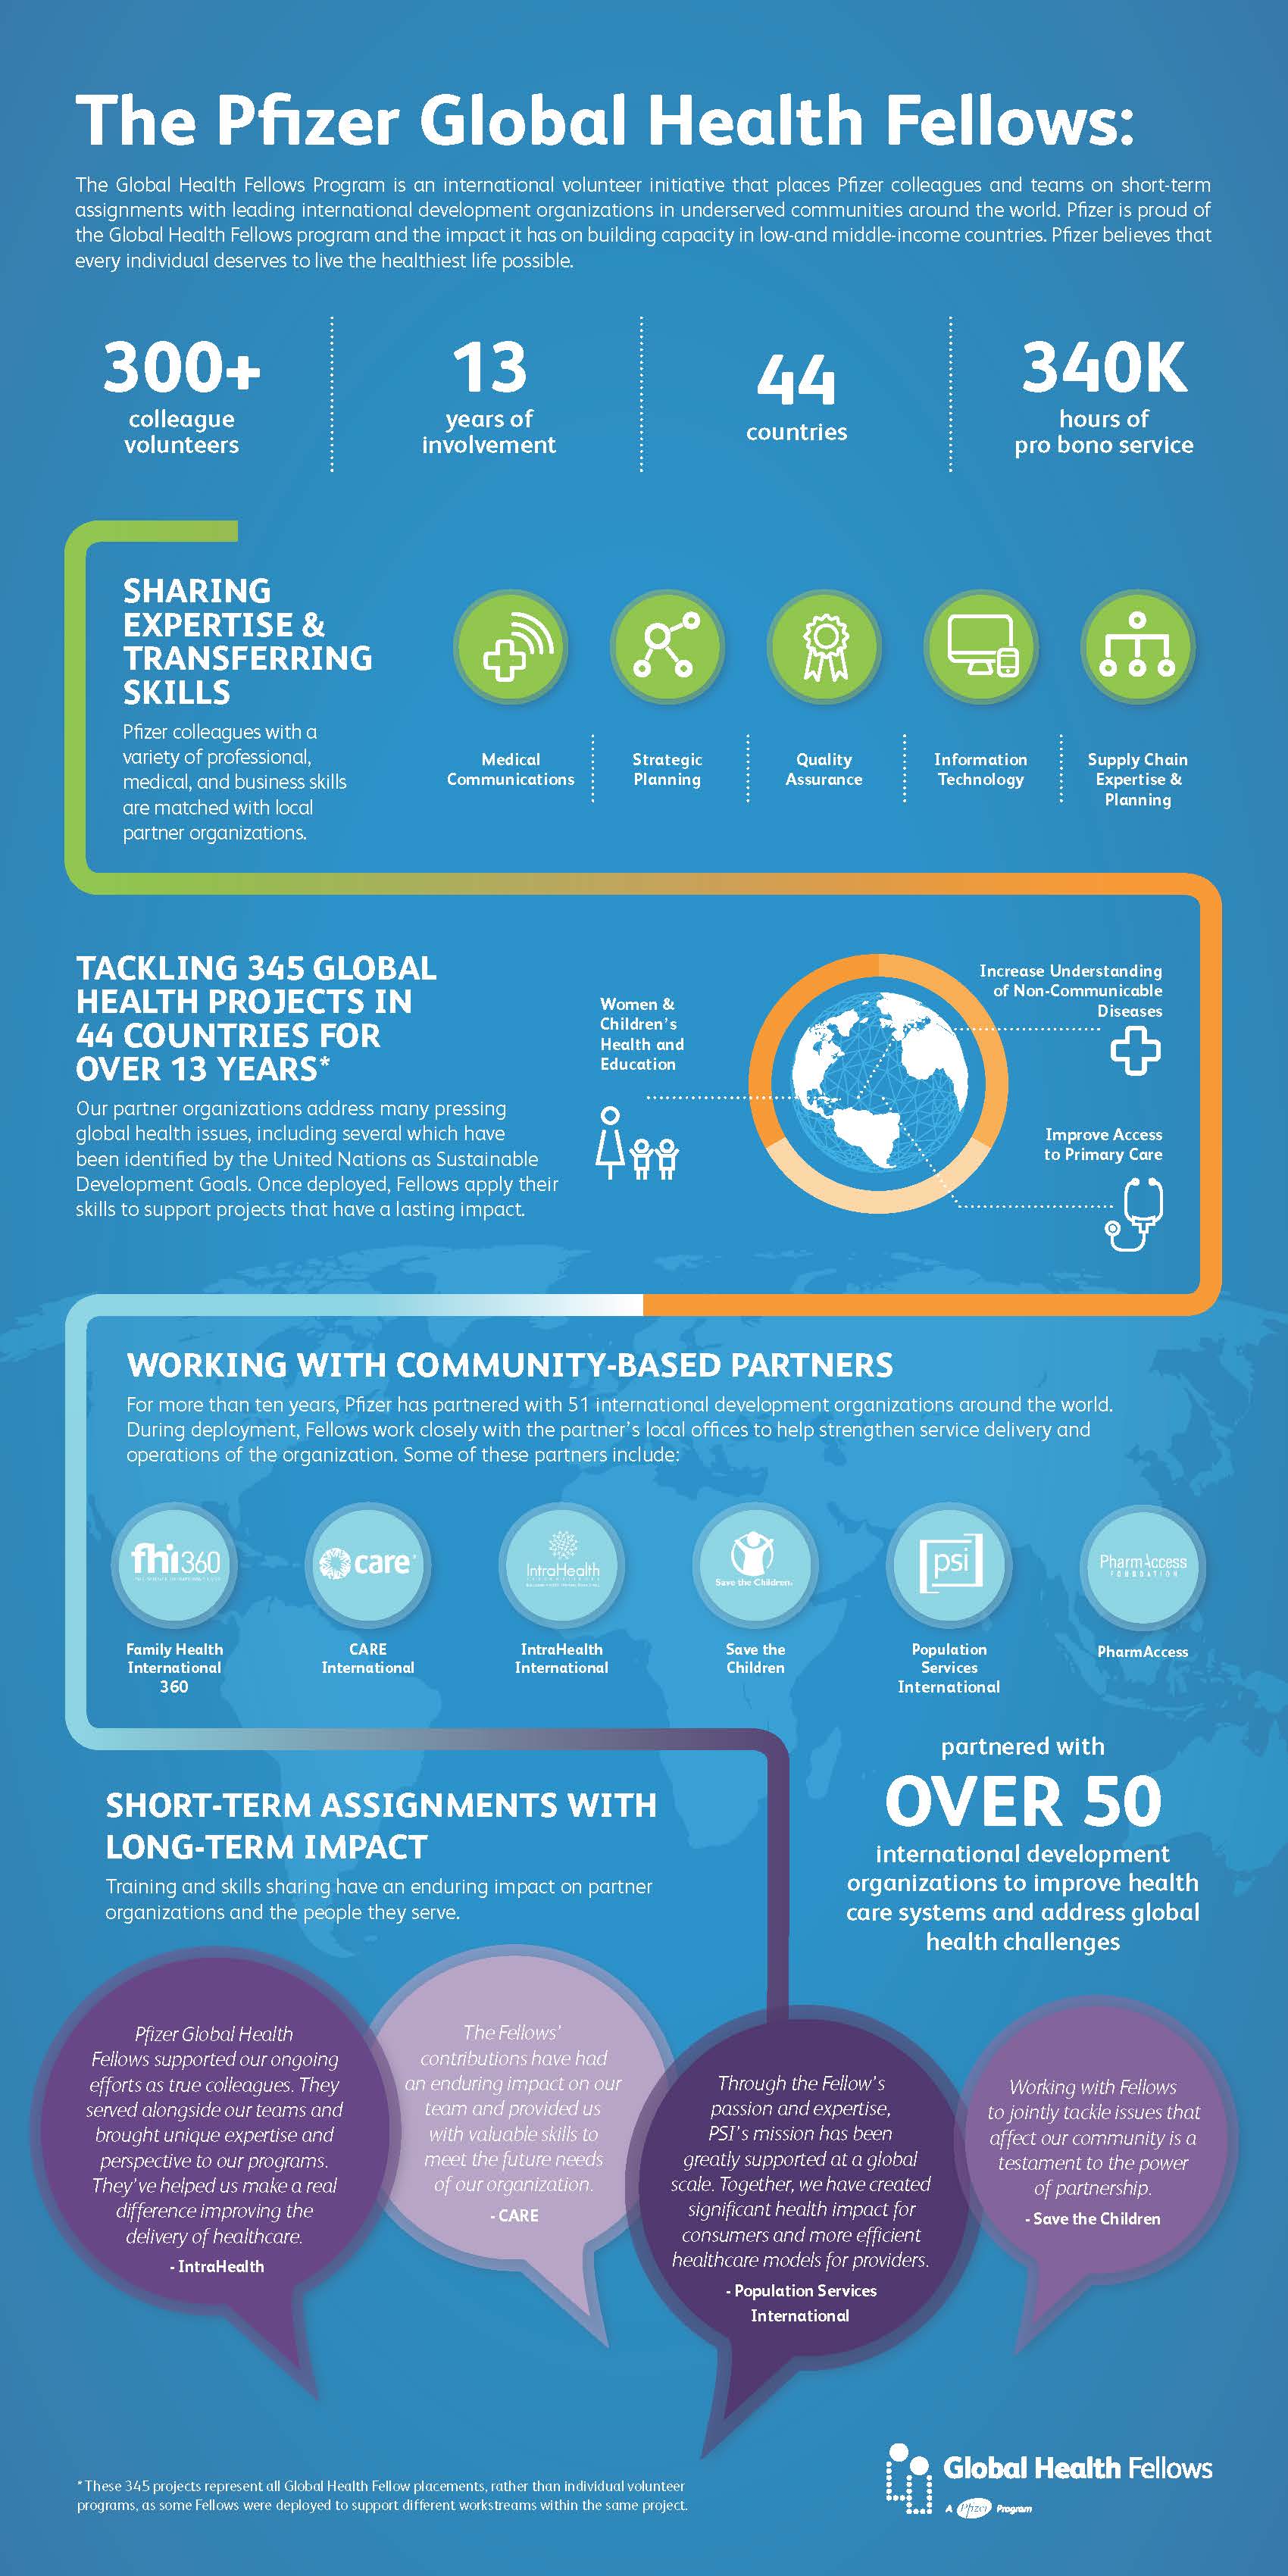 The Fpizer Global Health Fellows infographic